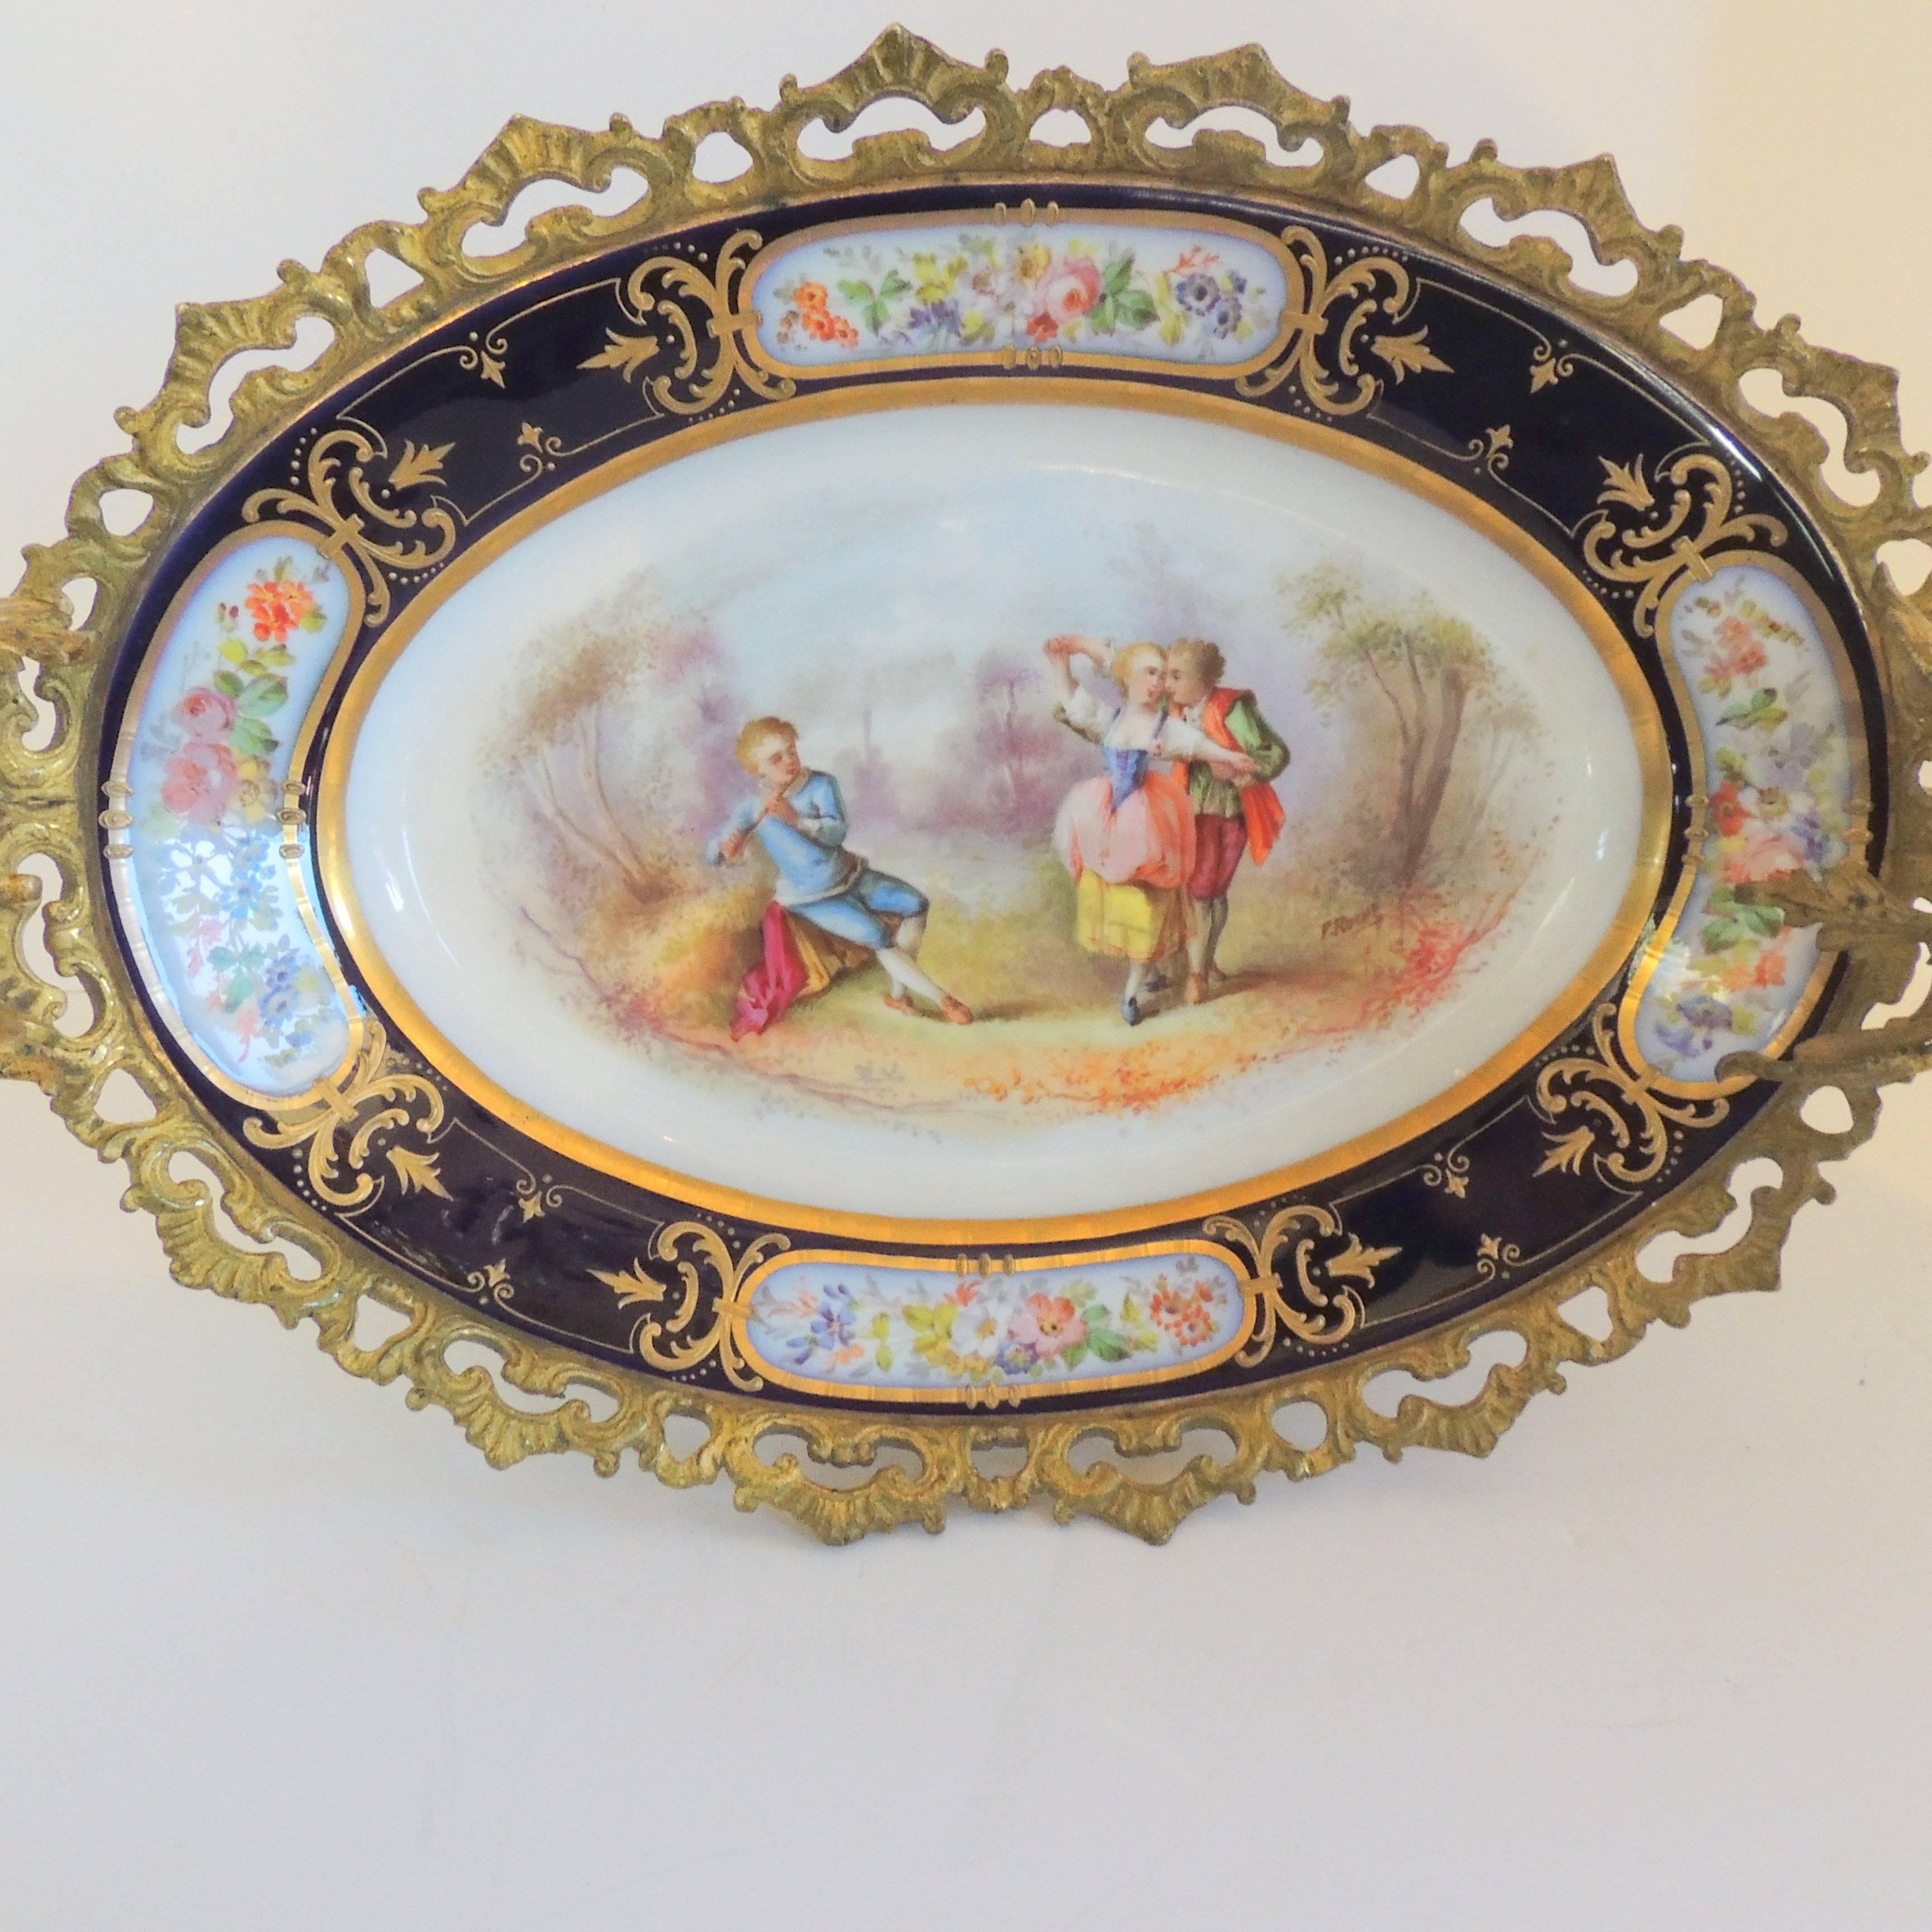 Wonderful French Ormolu Bronze Sevres Hand-Painted Porcelain Centerpiece Tray In Good Condition For Sale In Roslyn, NY